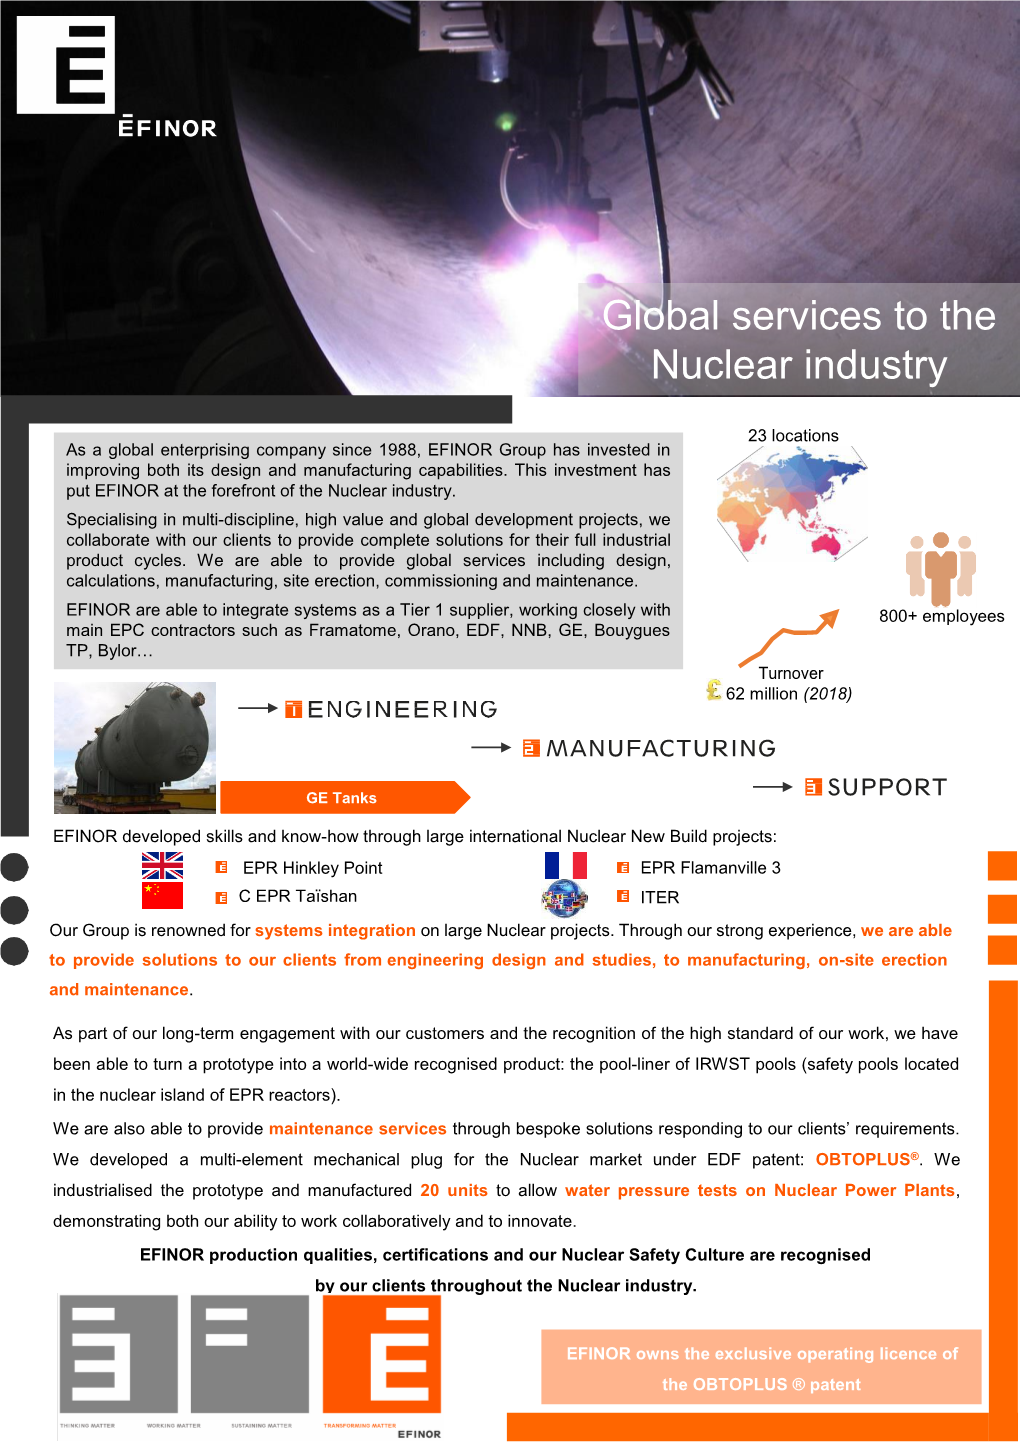 Global Services to the Nuclear Industry